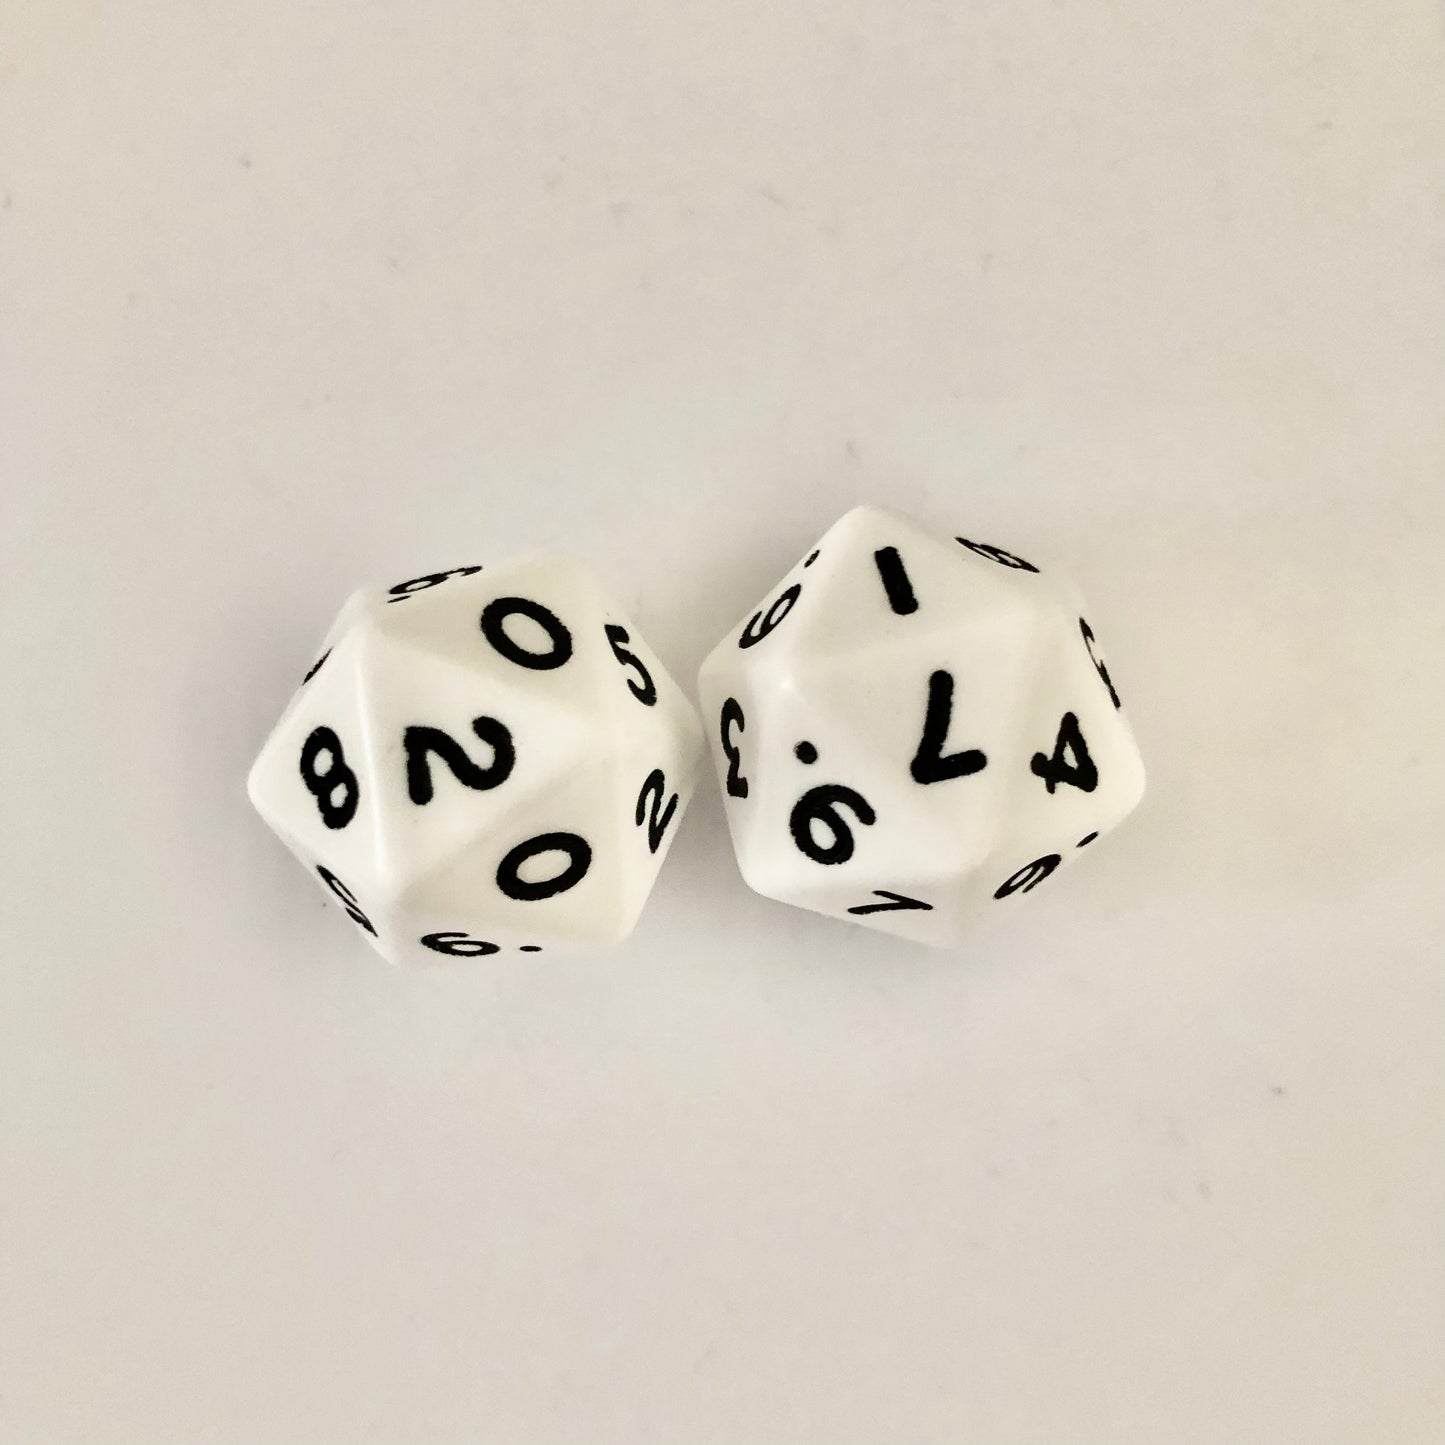 20 sided dice (D20) opaque polydice 0-9 x 2 bag of 2